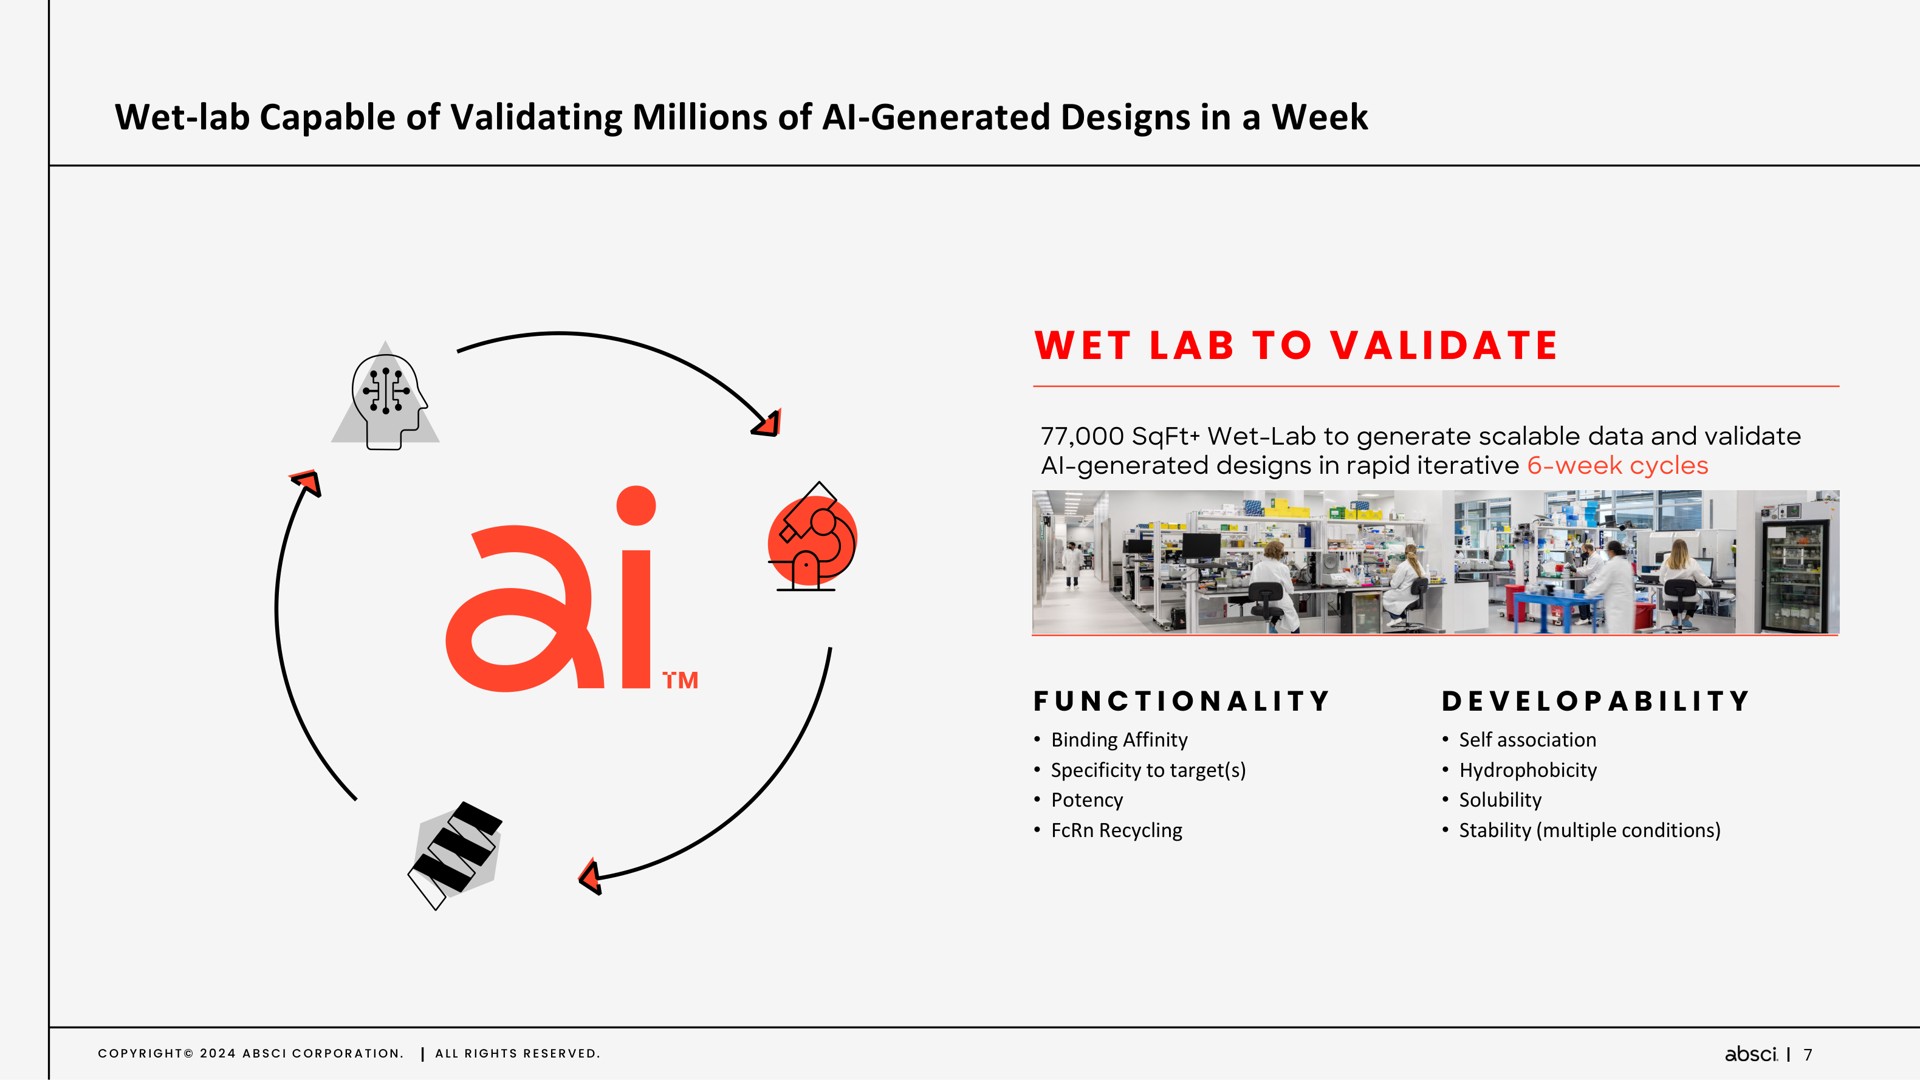 wet lab capable of validating millions of generated designs in a week a a i a generated on wet lab to validate | Absci